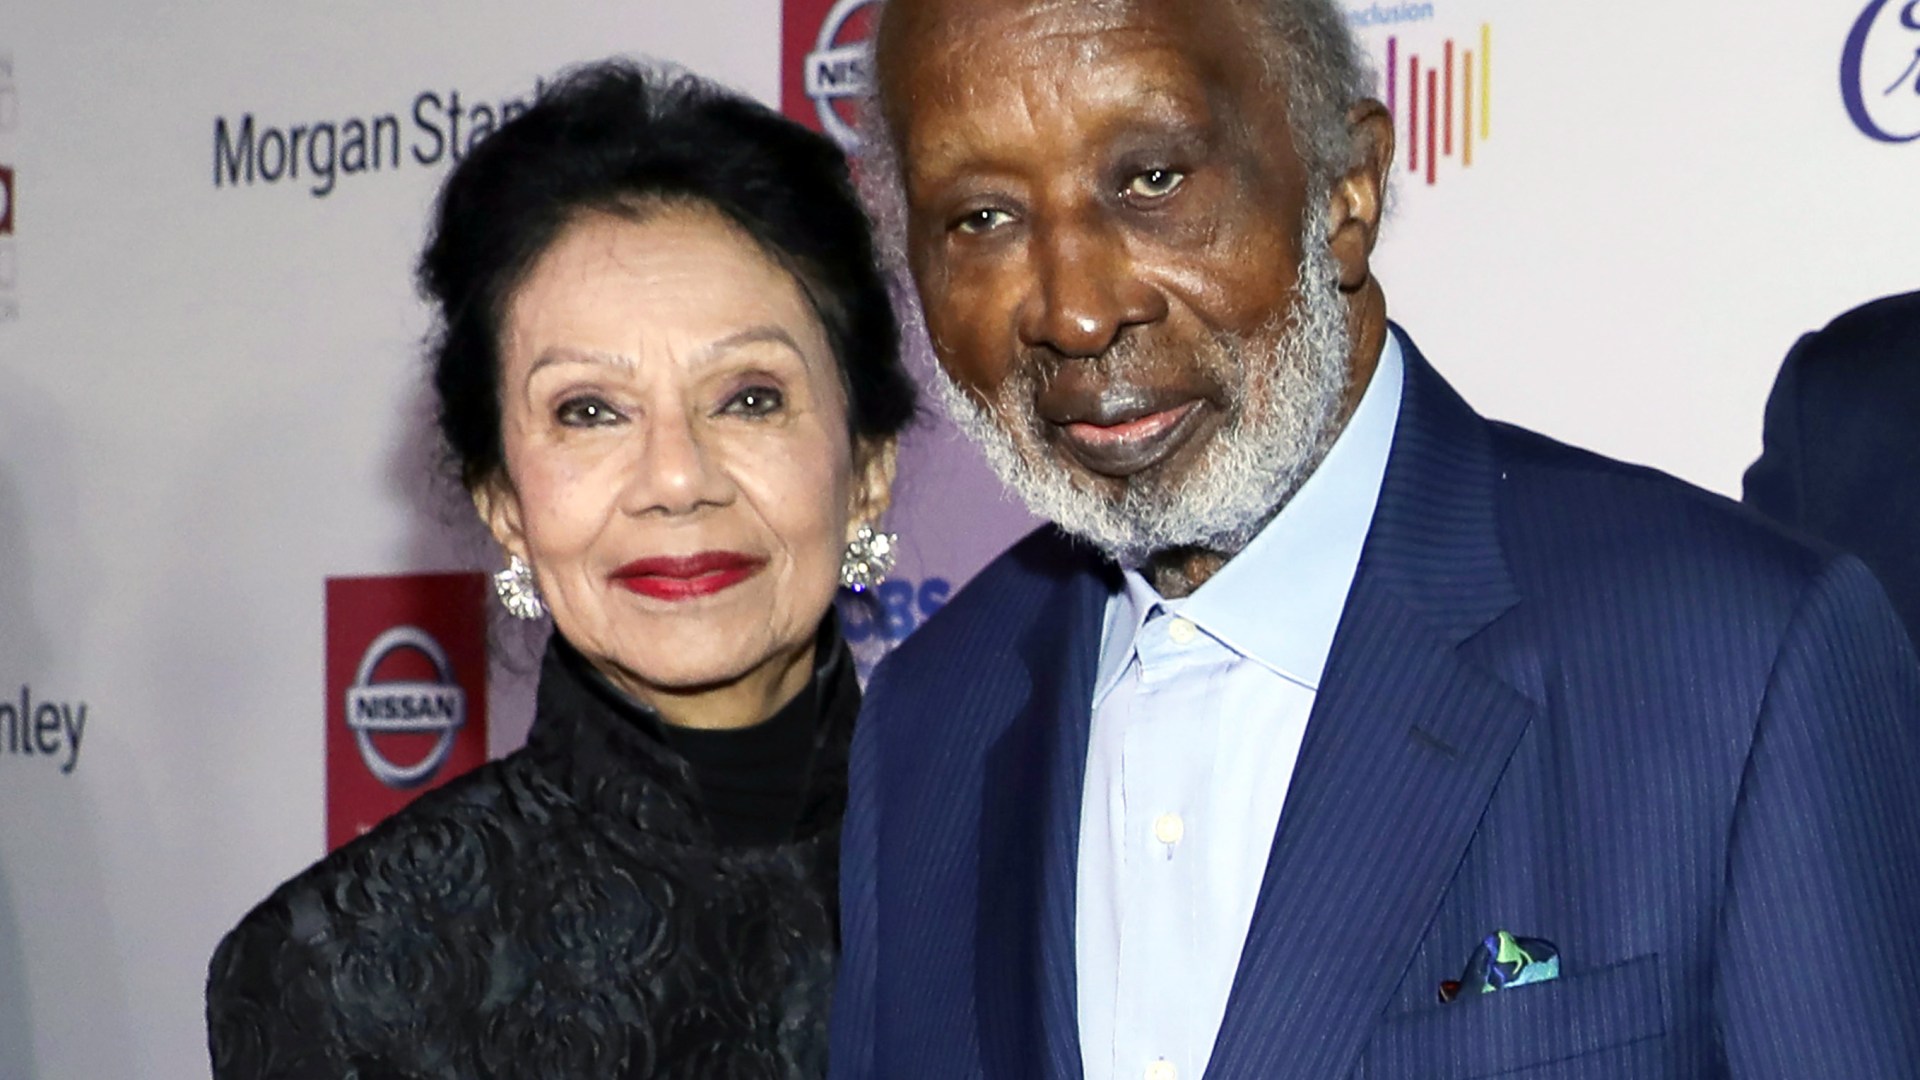 Clarence Avant, Grammy award-winning pioneer and ‘Godfather Black Music’ died at his home at the age of 92